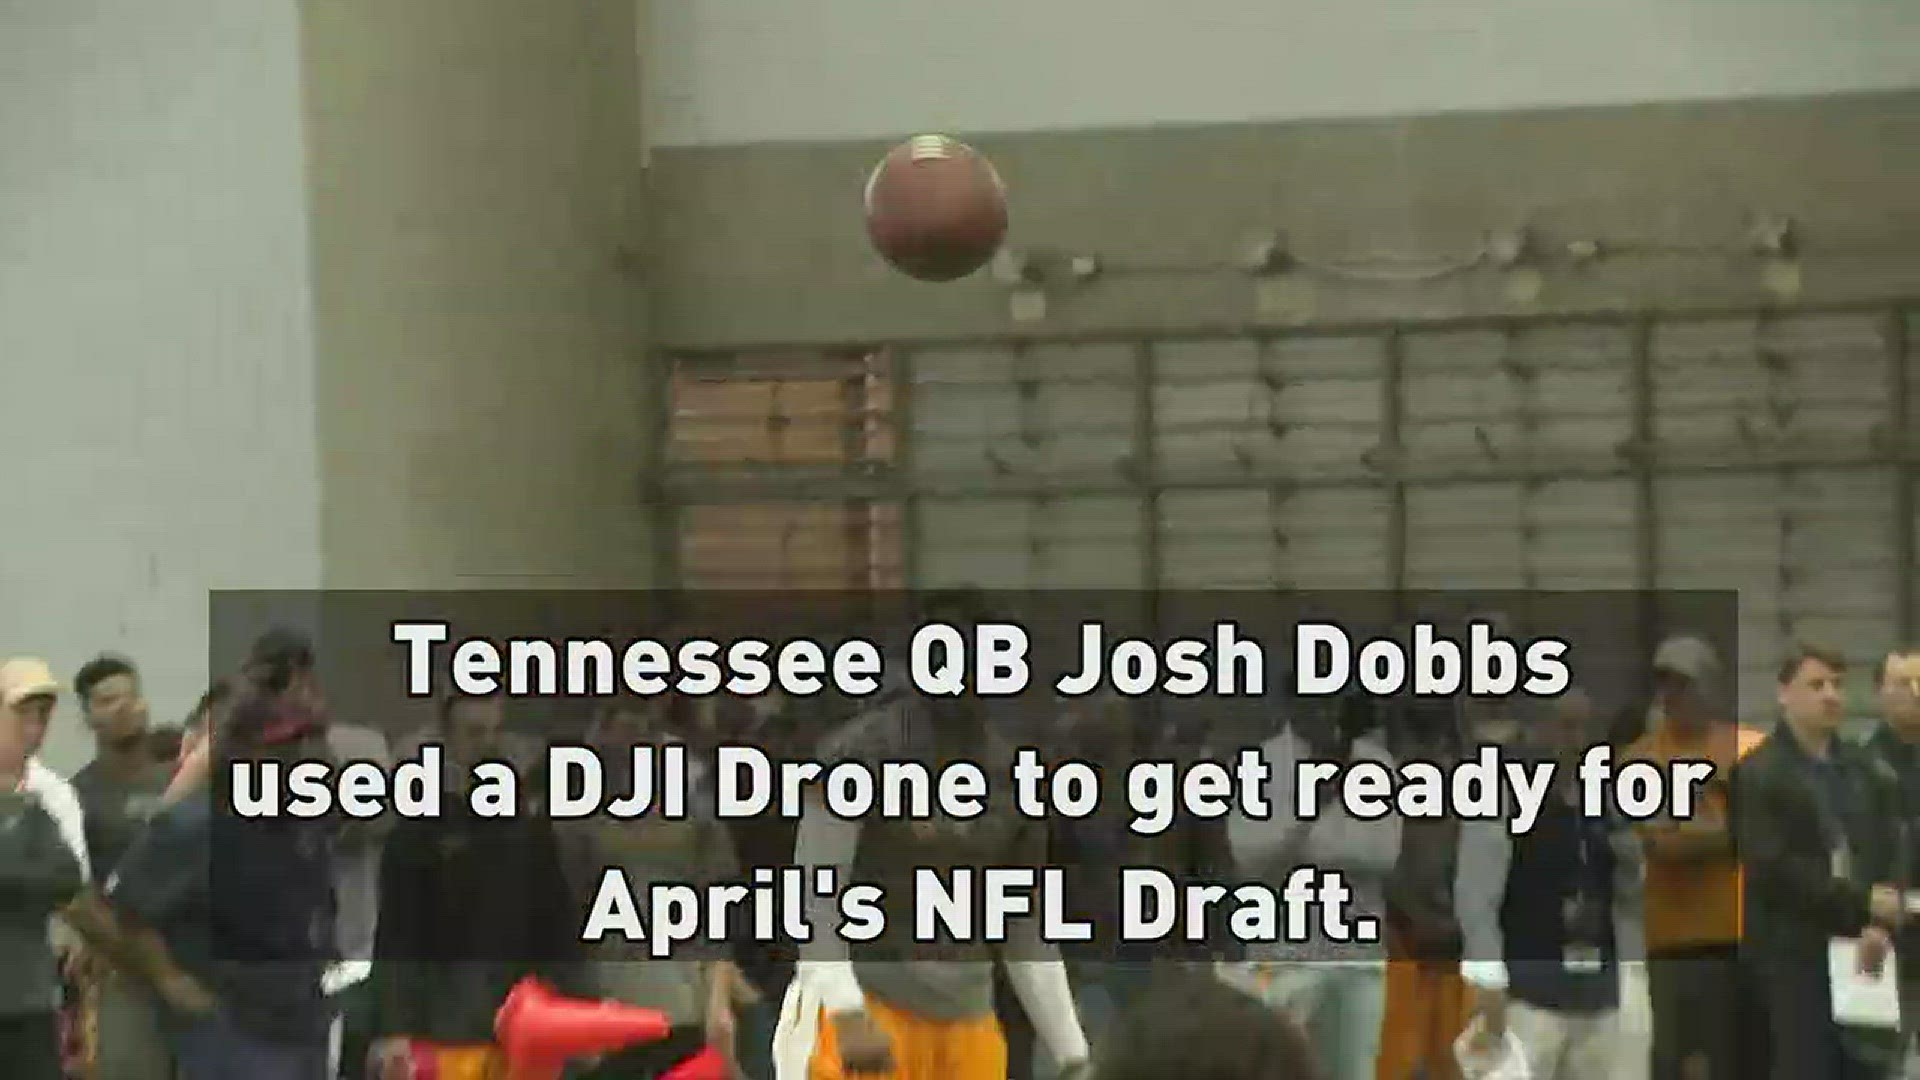 VFL Josh Dobbs used a drone to improve his passing ahead of the 2017 NFL Draft. Prep coaches and athletes are using a similar tactic to improve their skills.